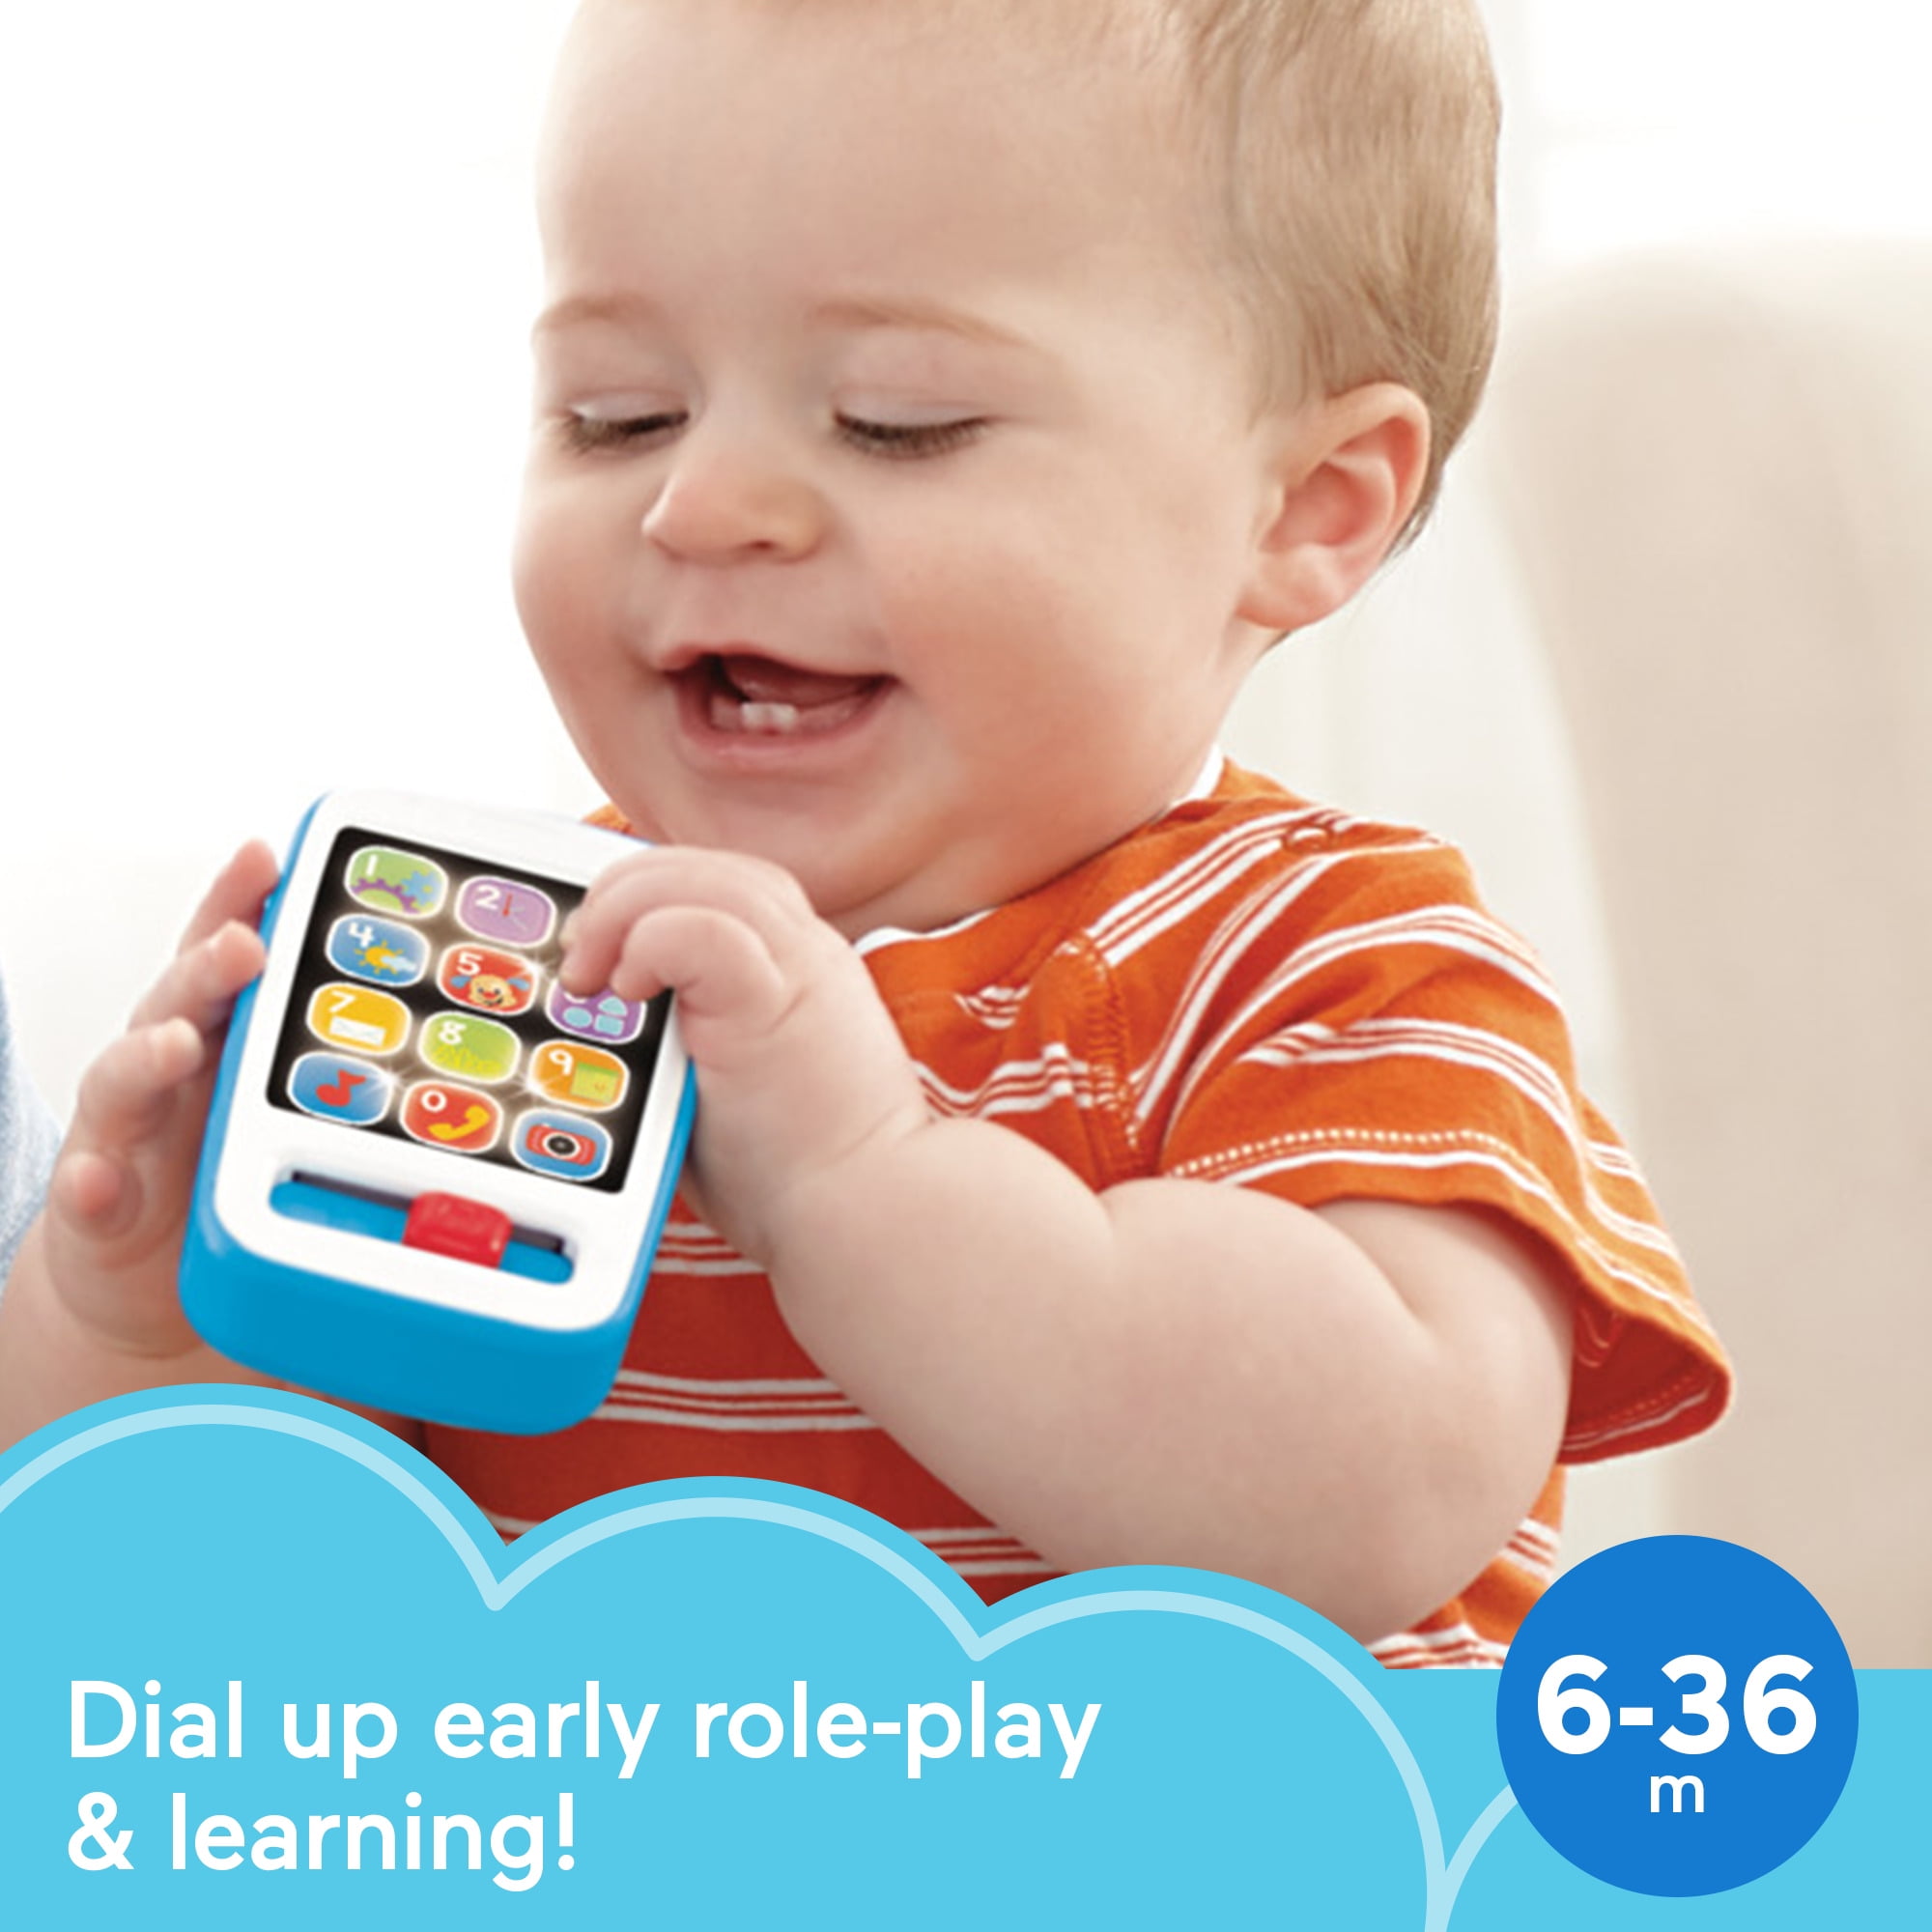 Fisher-Price® Laugh and Learn Smart Phone, 1 ct - City Market